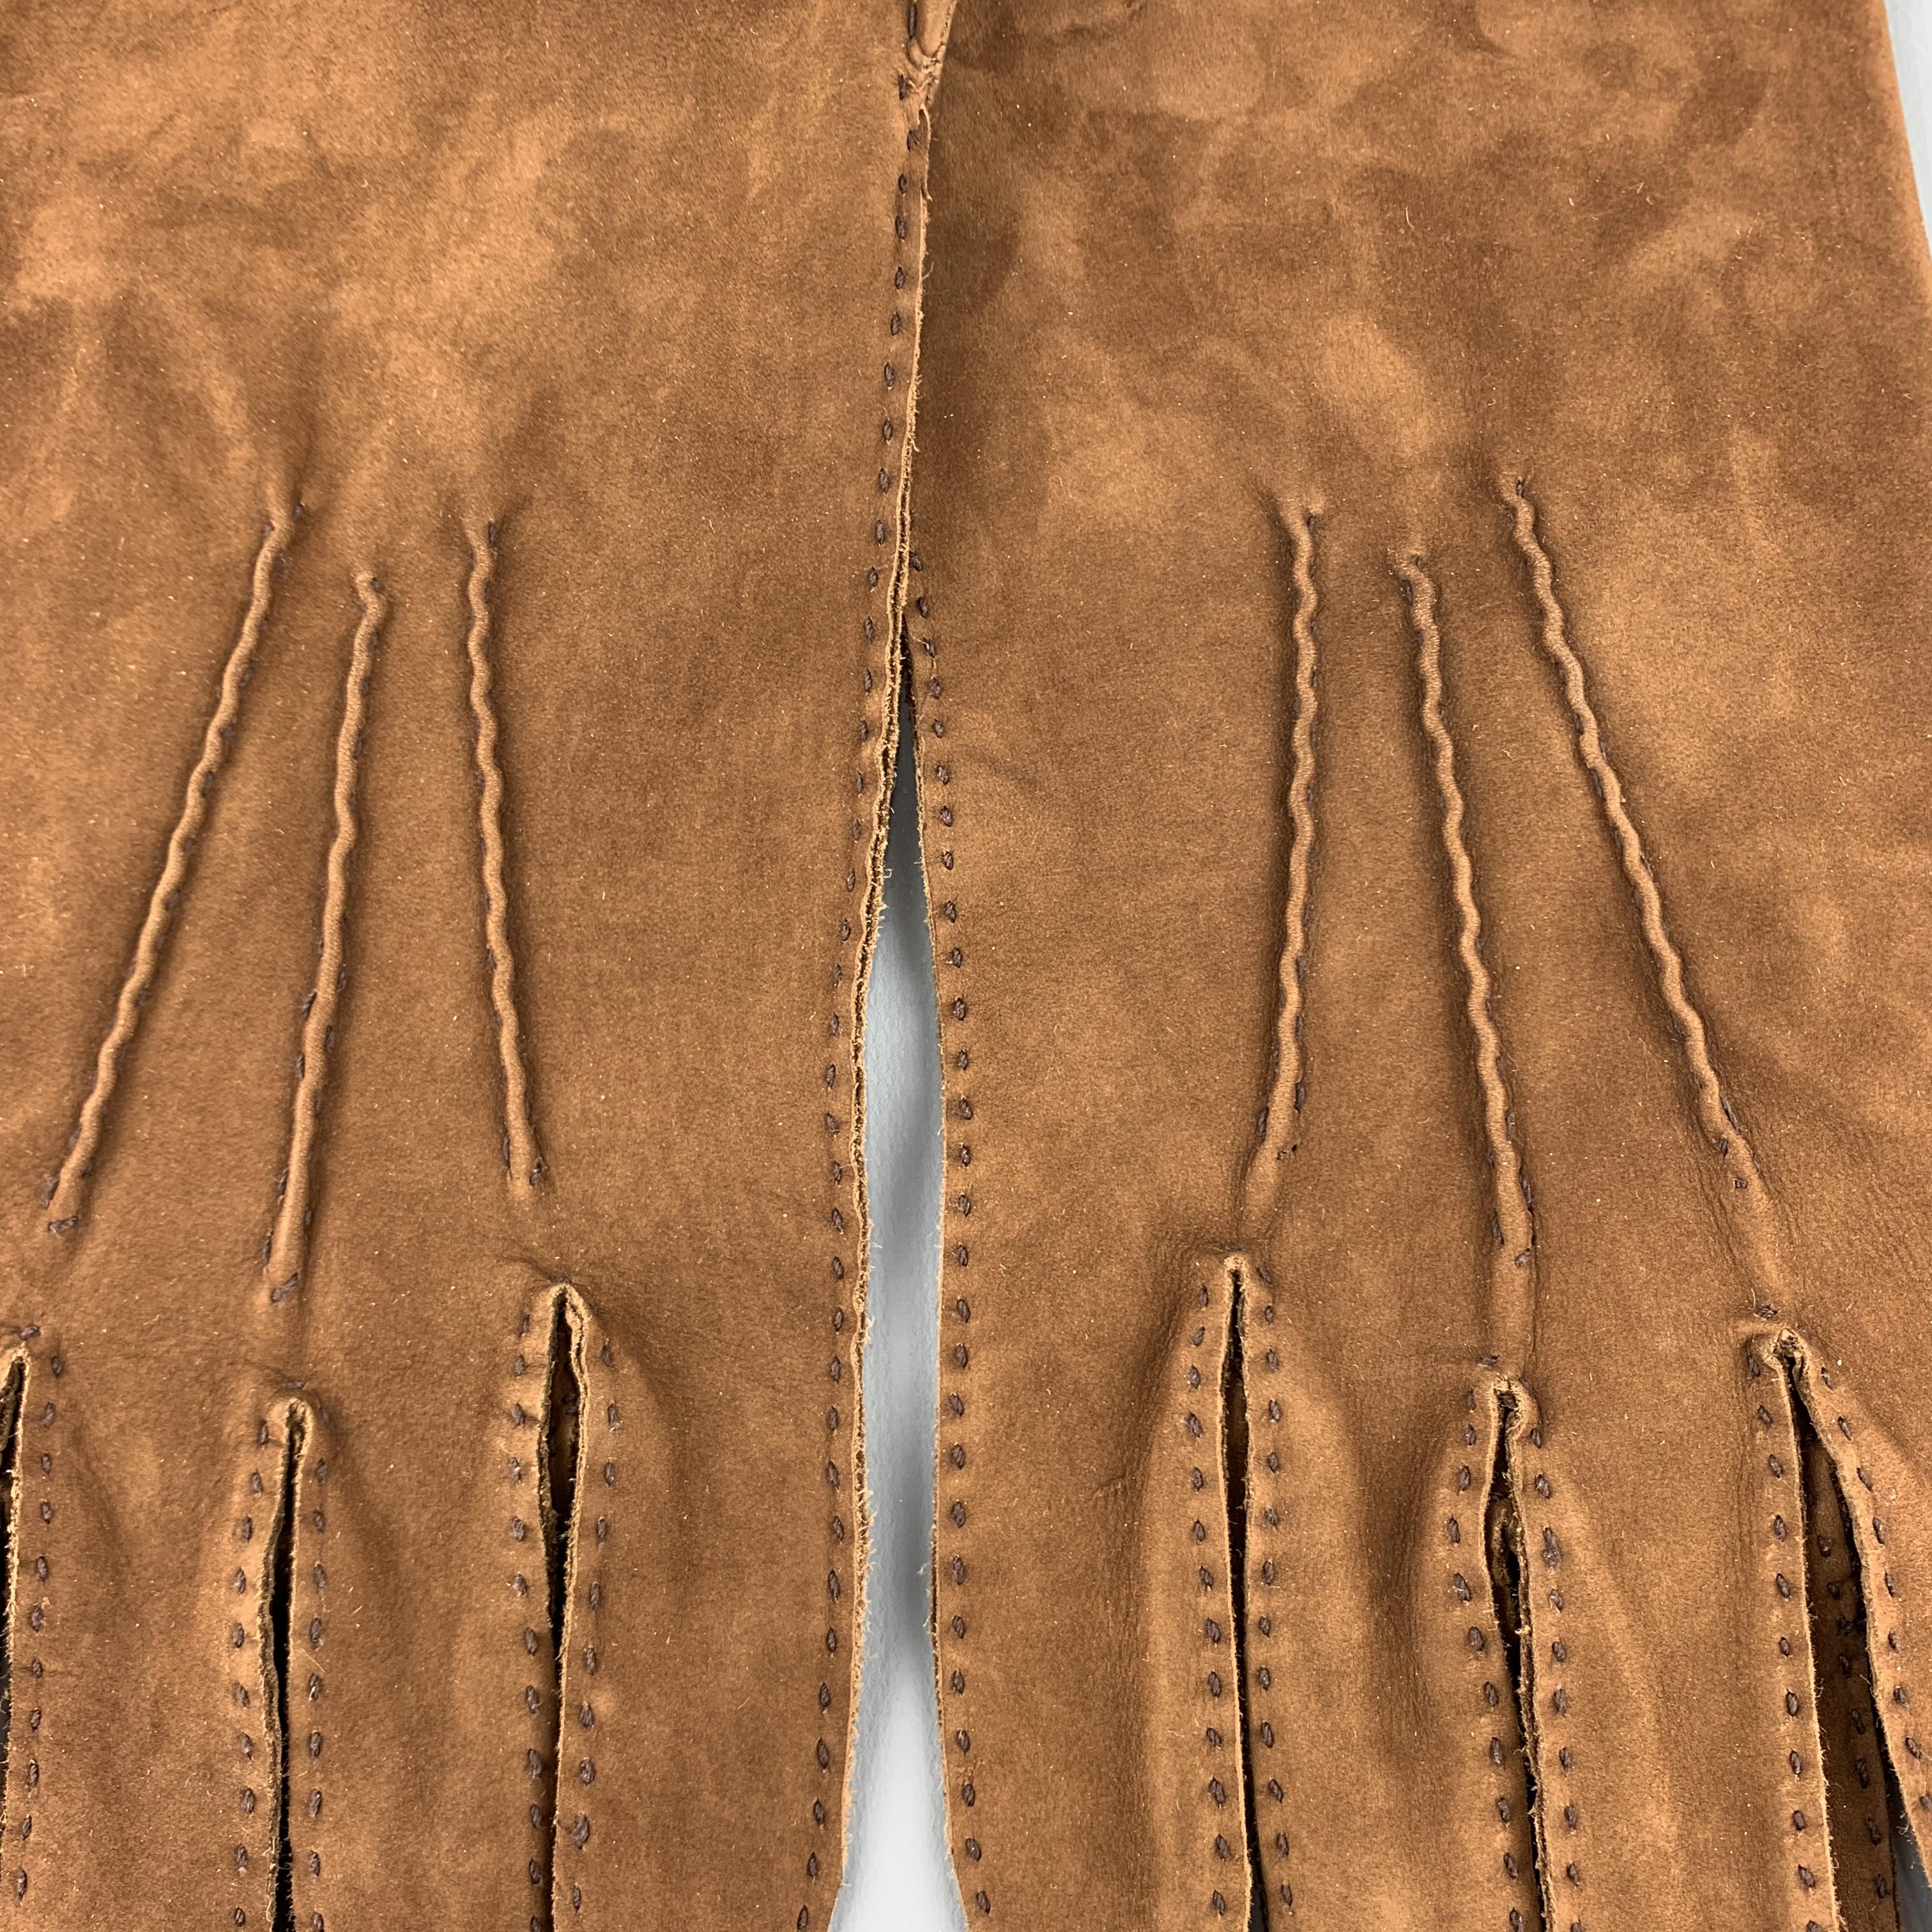 Vintage PICKETT gloves come in brown sueded calf skin leather with top stitching. Made in England.

Very Good Pre-Owned Condition.
Marked: 9

Width: 4.45 in.
Length: 10.25 in.
